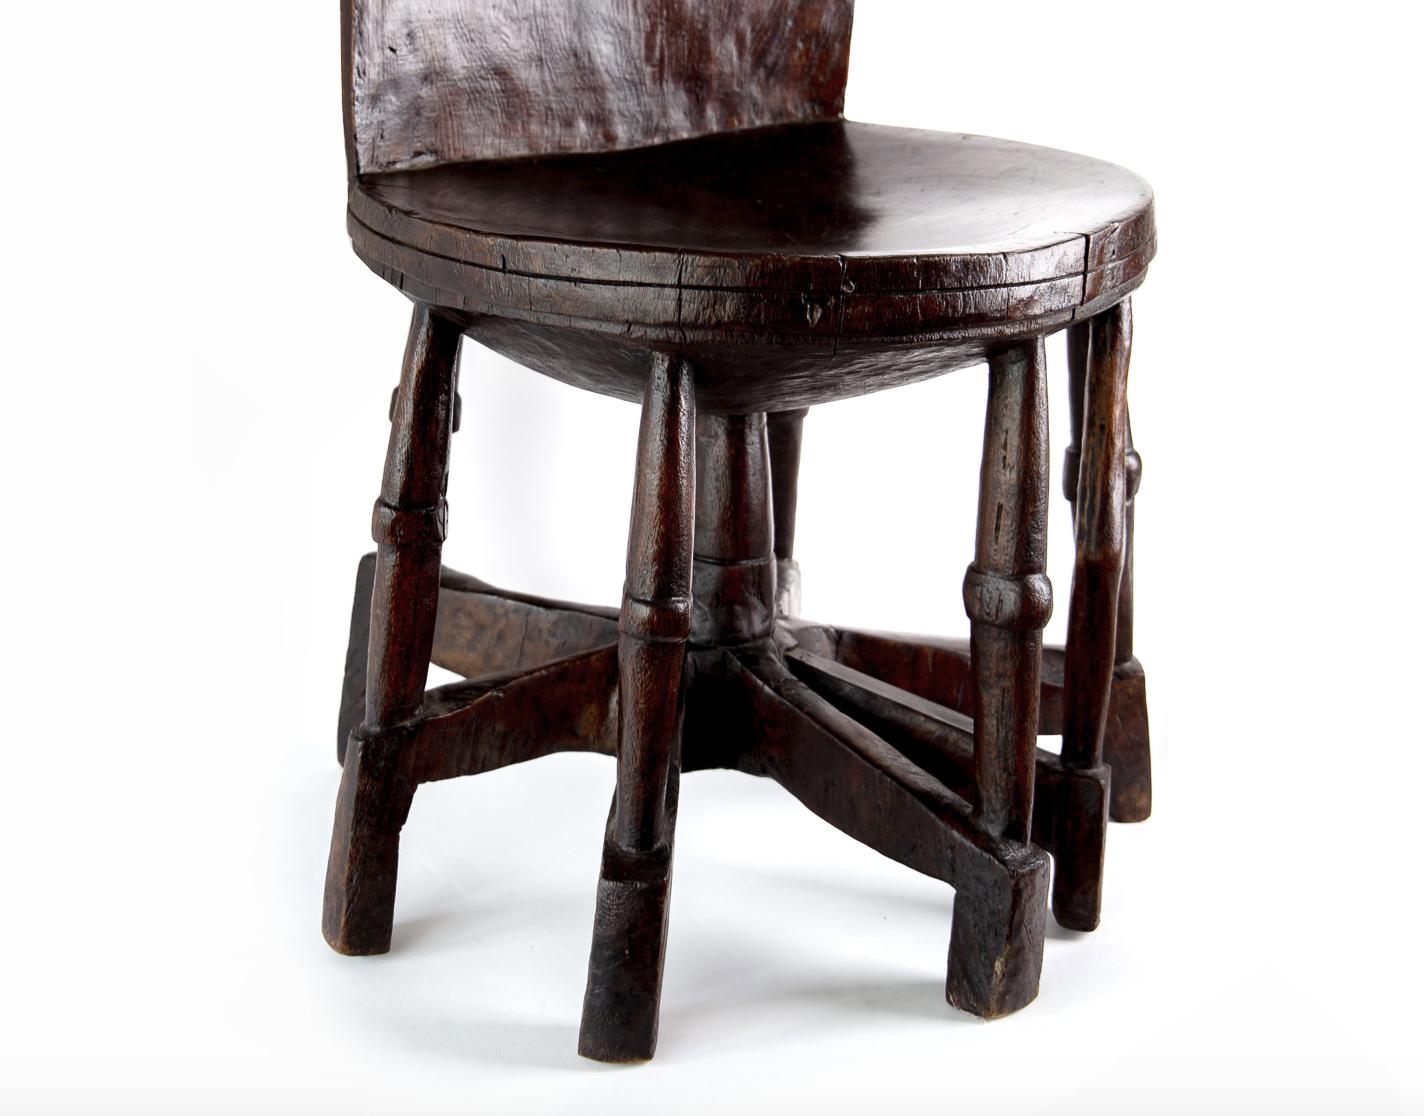 Hand-Carved Sculptural Ethiopian Jimma Chair, Carved from One Piece of Wood, circa 1880